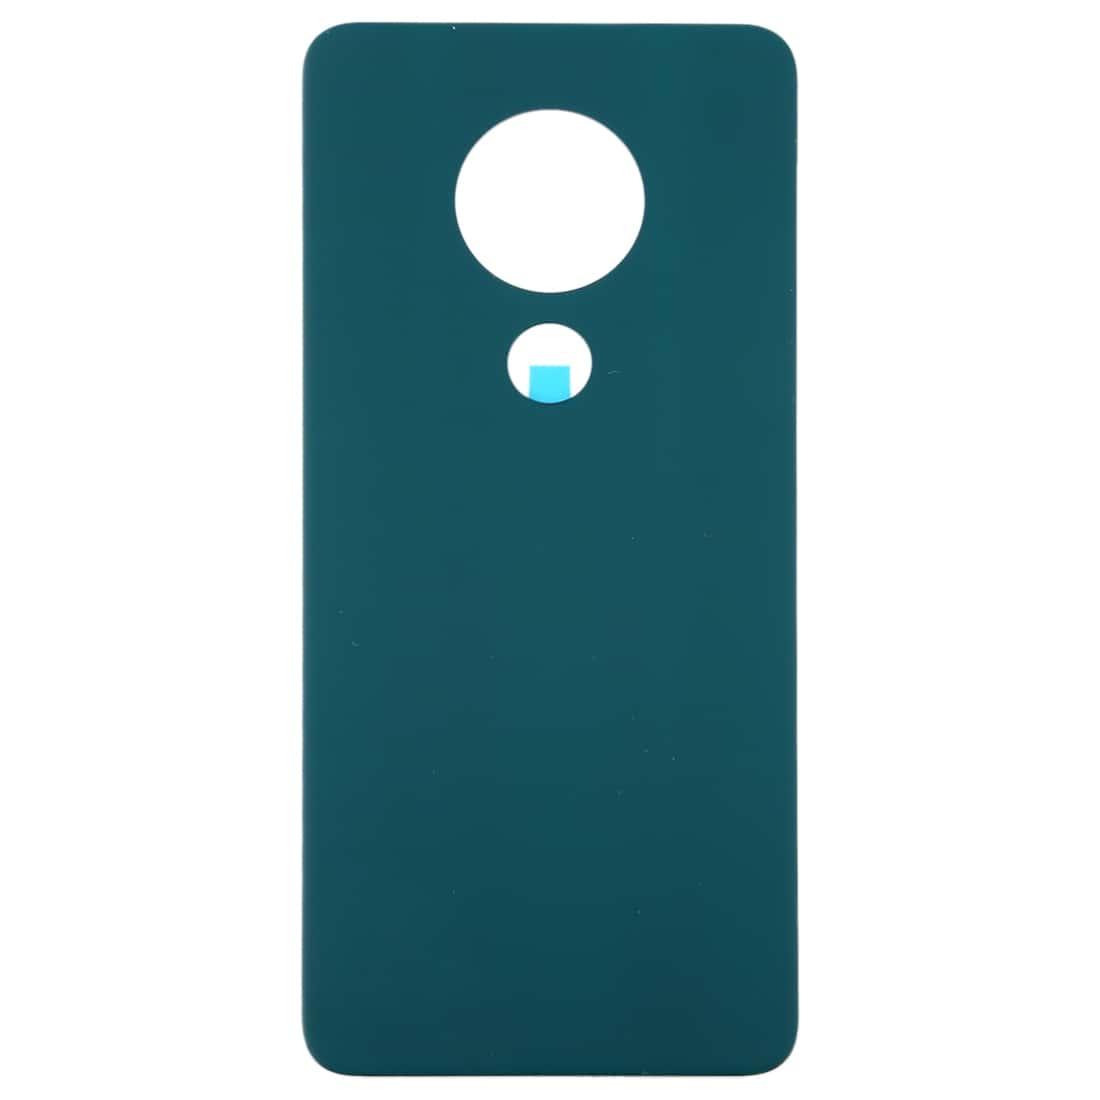 Back Glass Panel for  Nokia 7.2 Frosted Green